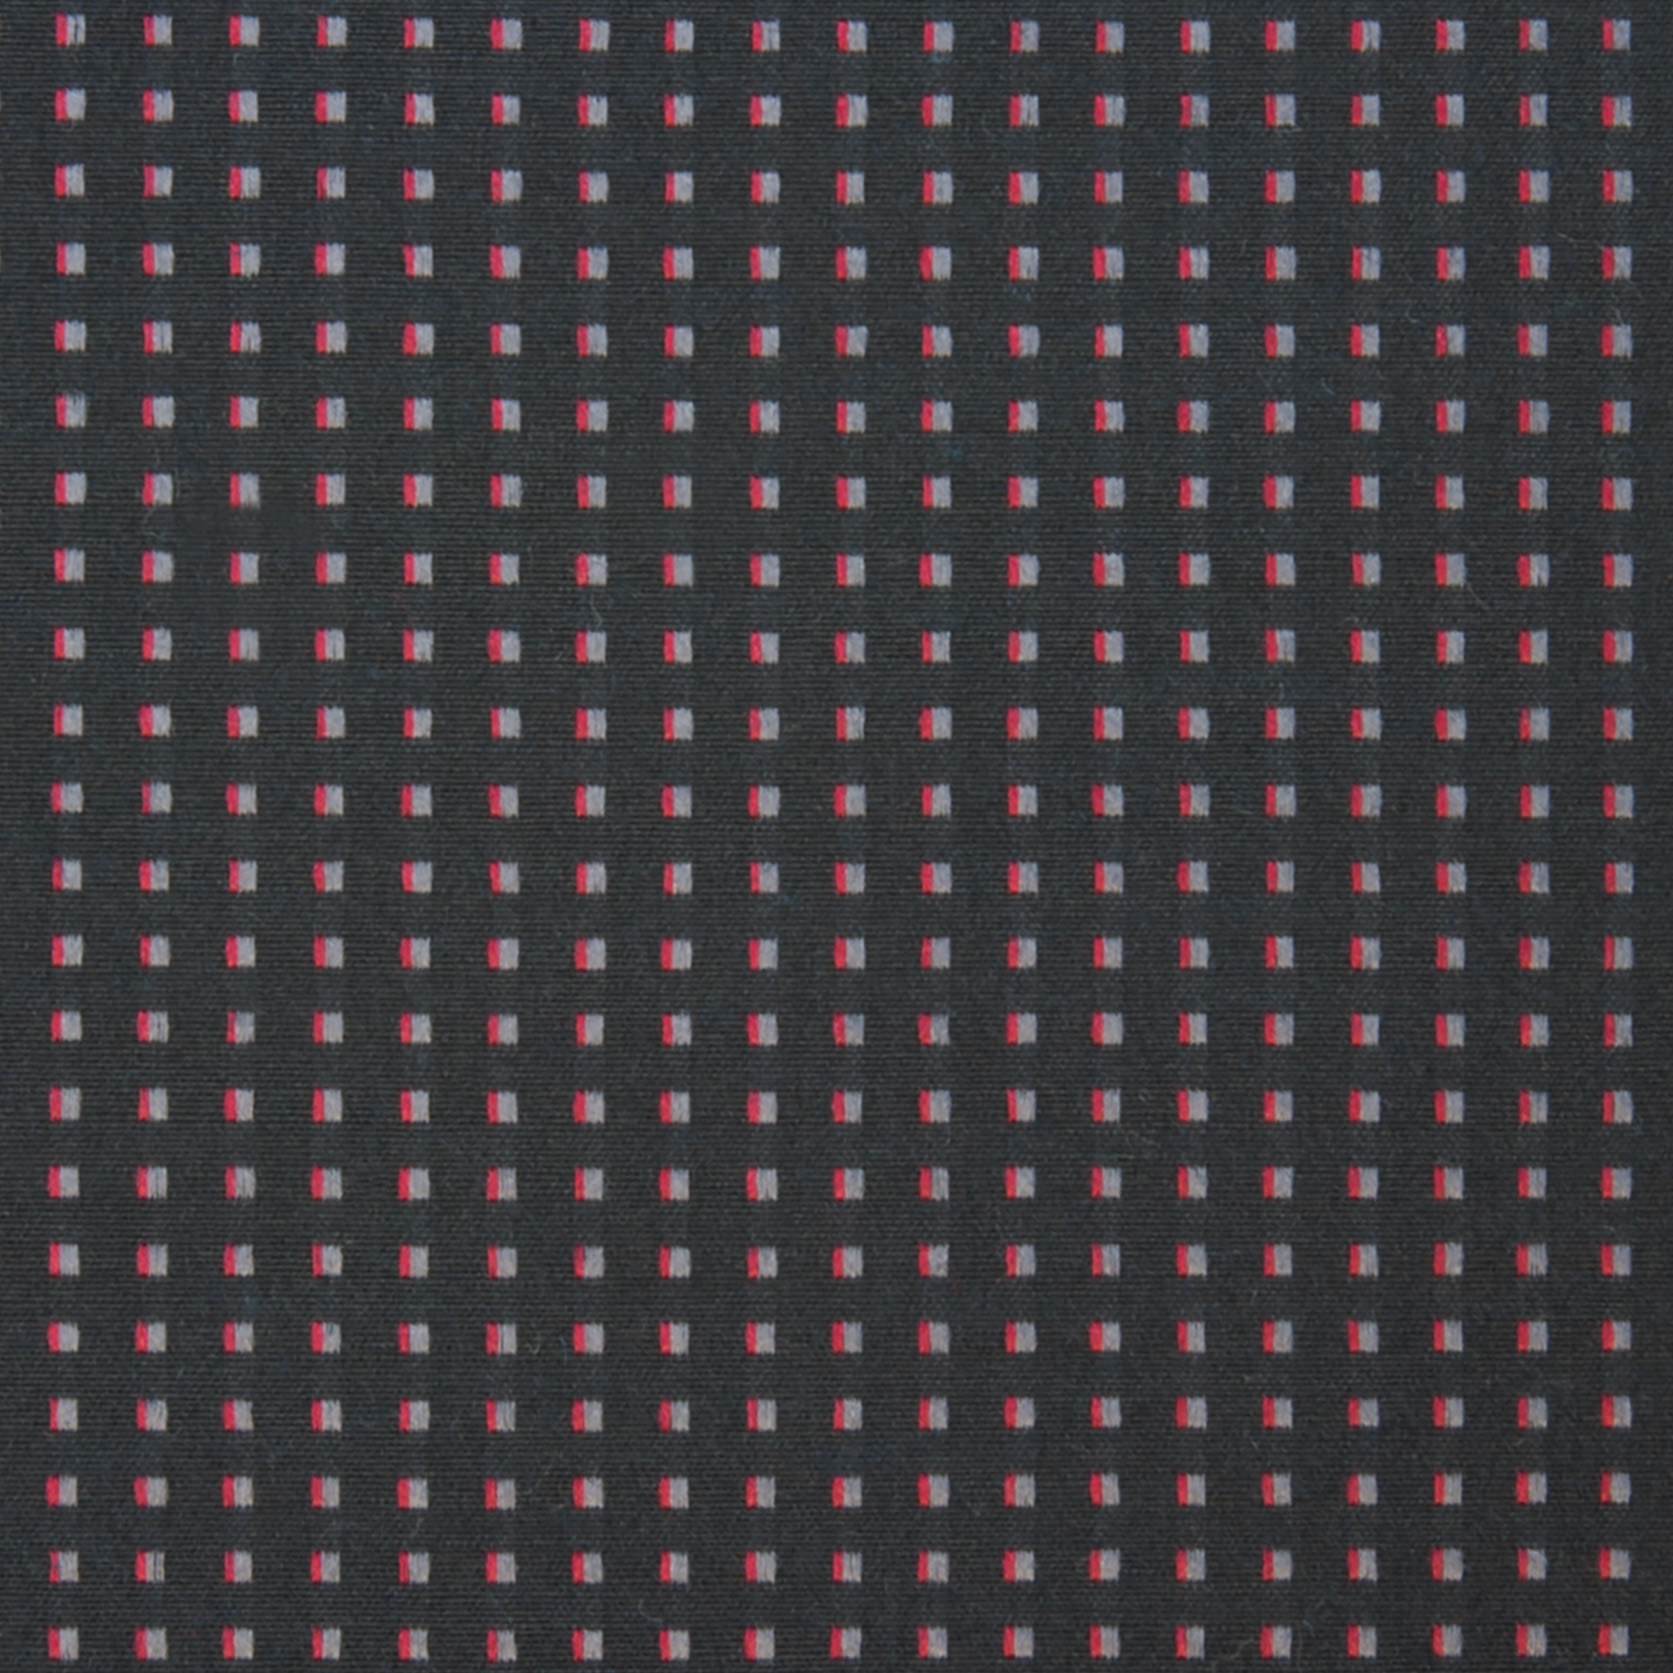 Black with Red Dots